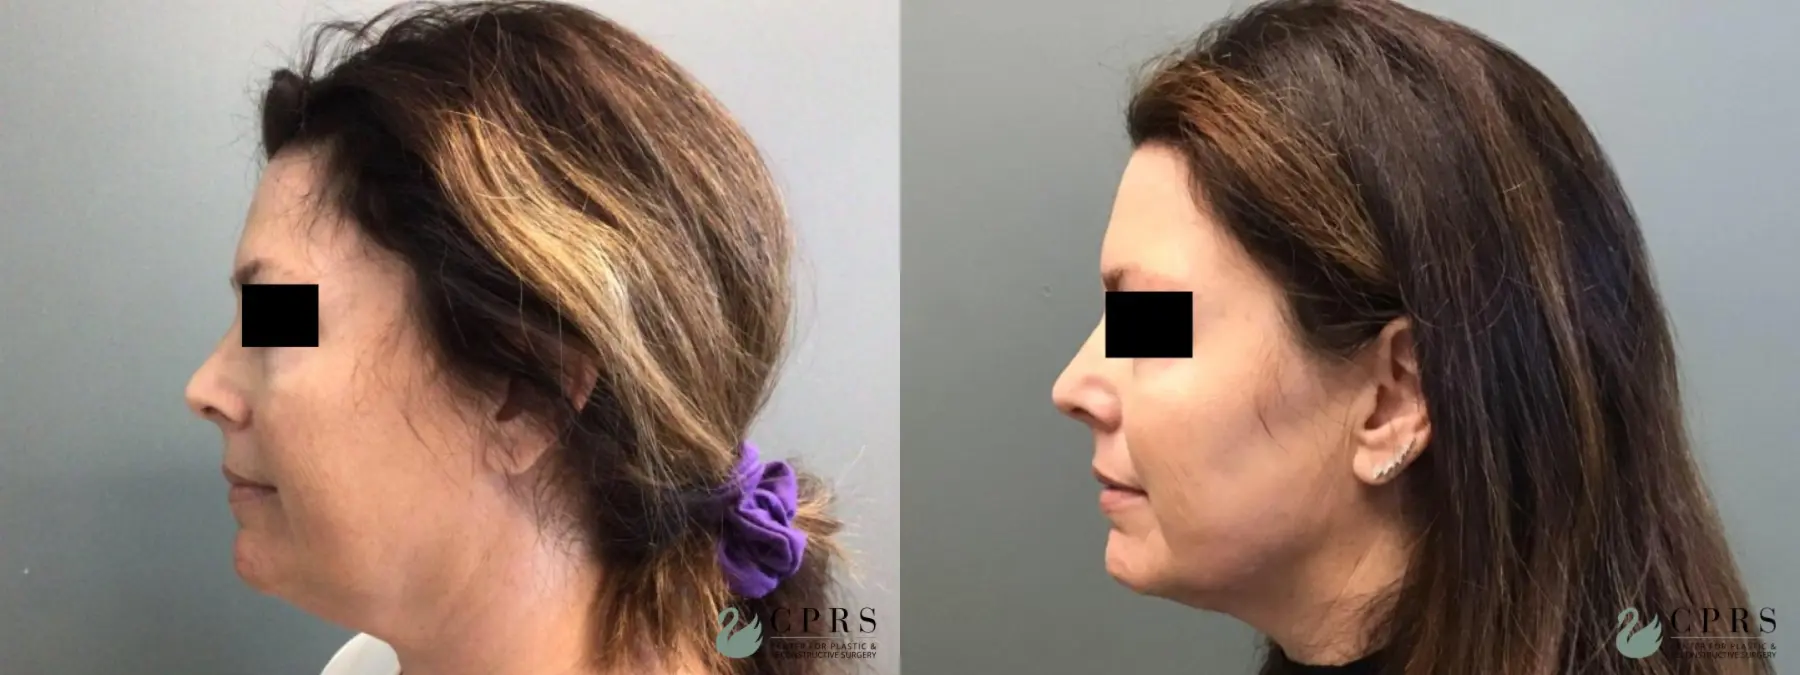 FaceTite: Patient 5 - Before and After 3